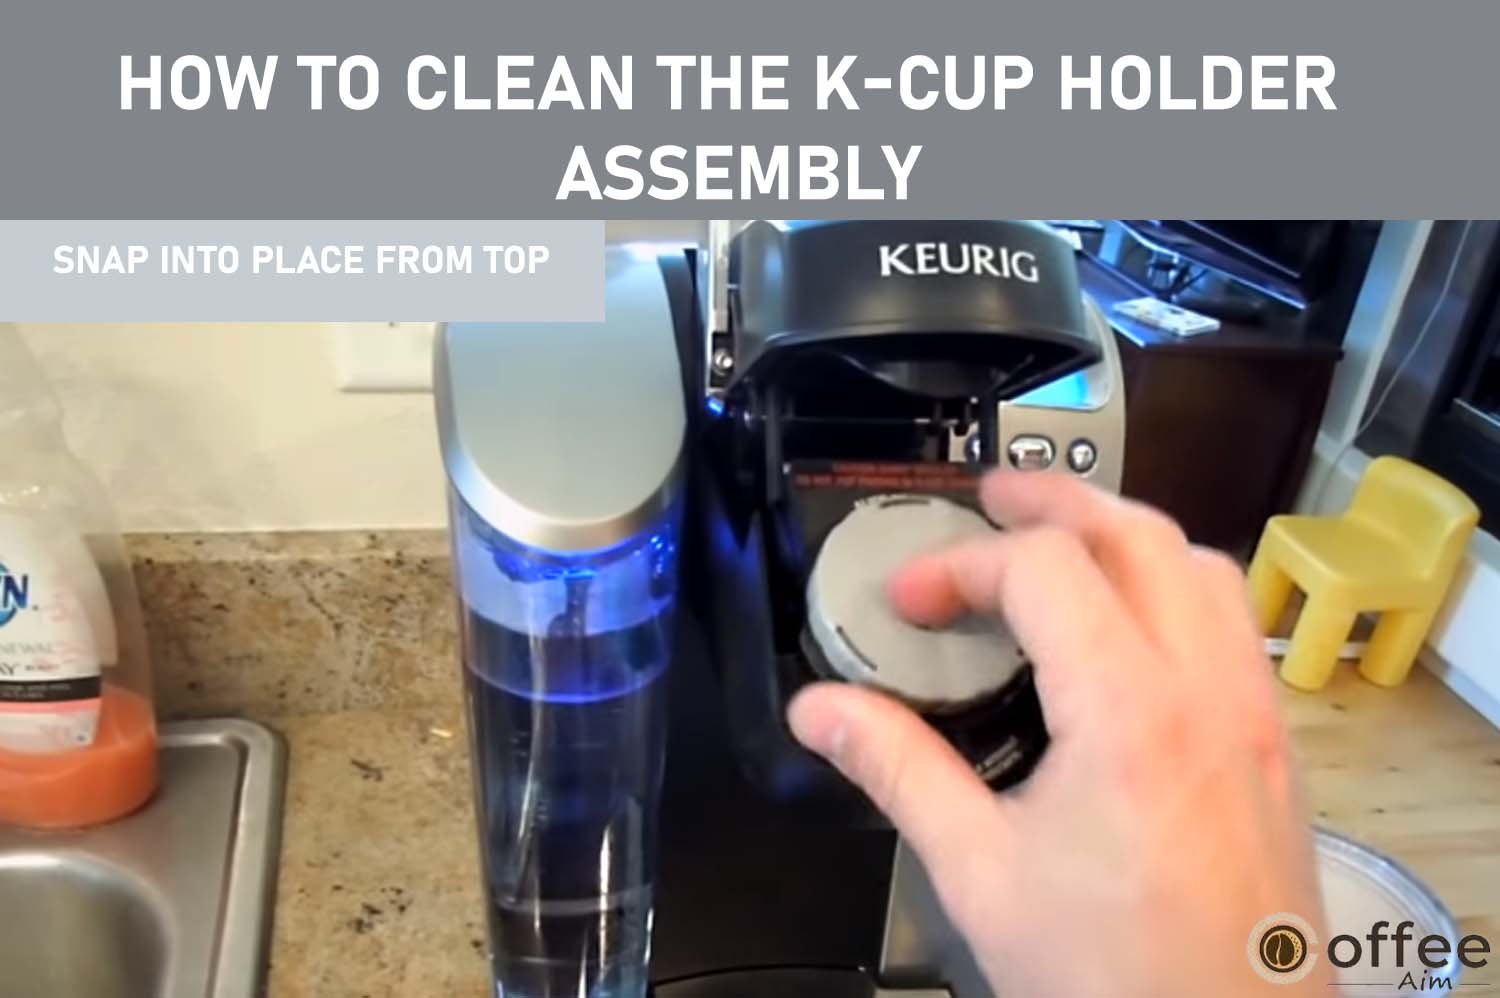 Press down firmly from the top to snap the K-Cup Holder back into place securely.
